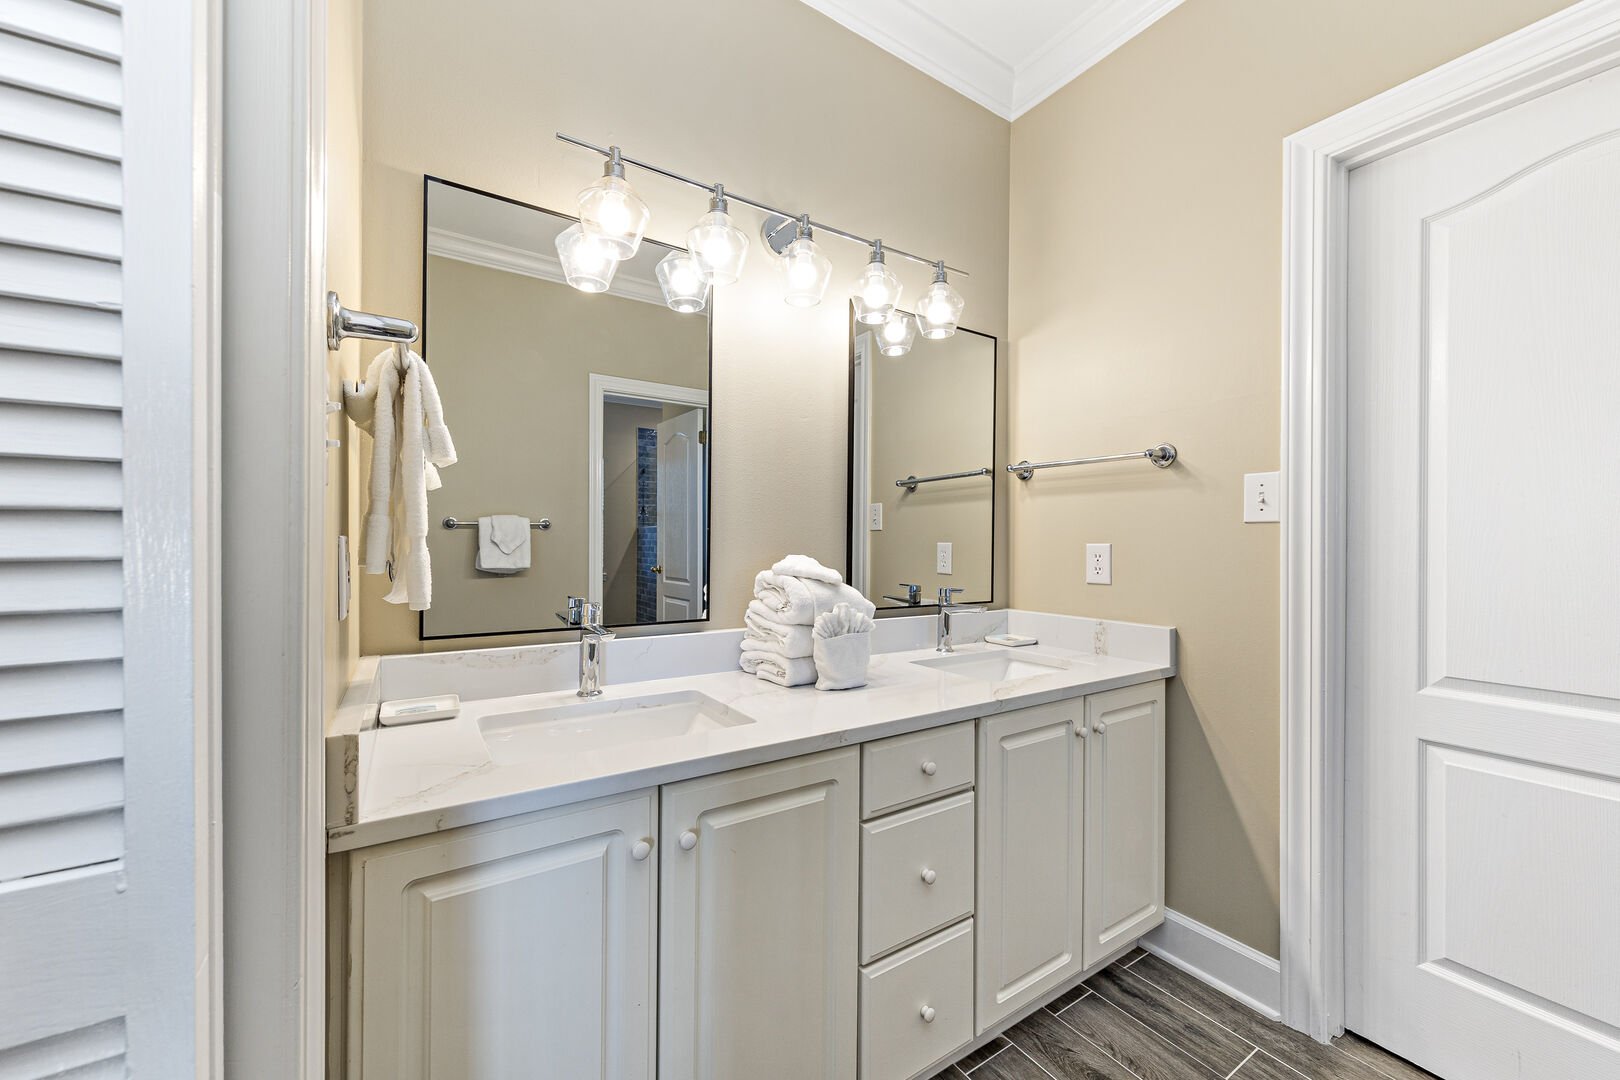 Updated bathroom Private Master EnSuite with Double Sink Vanity and Separate Walk In Shower